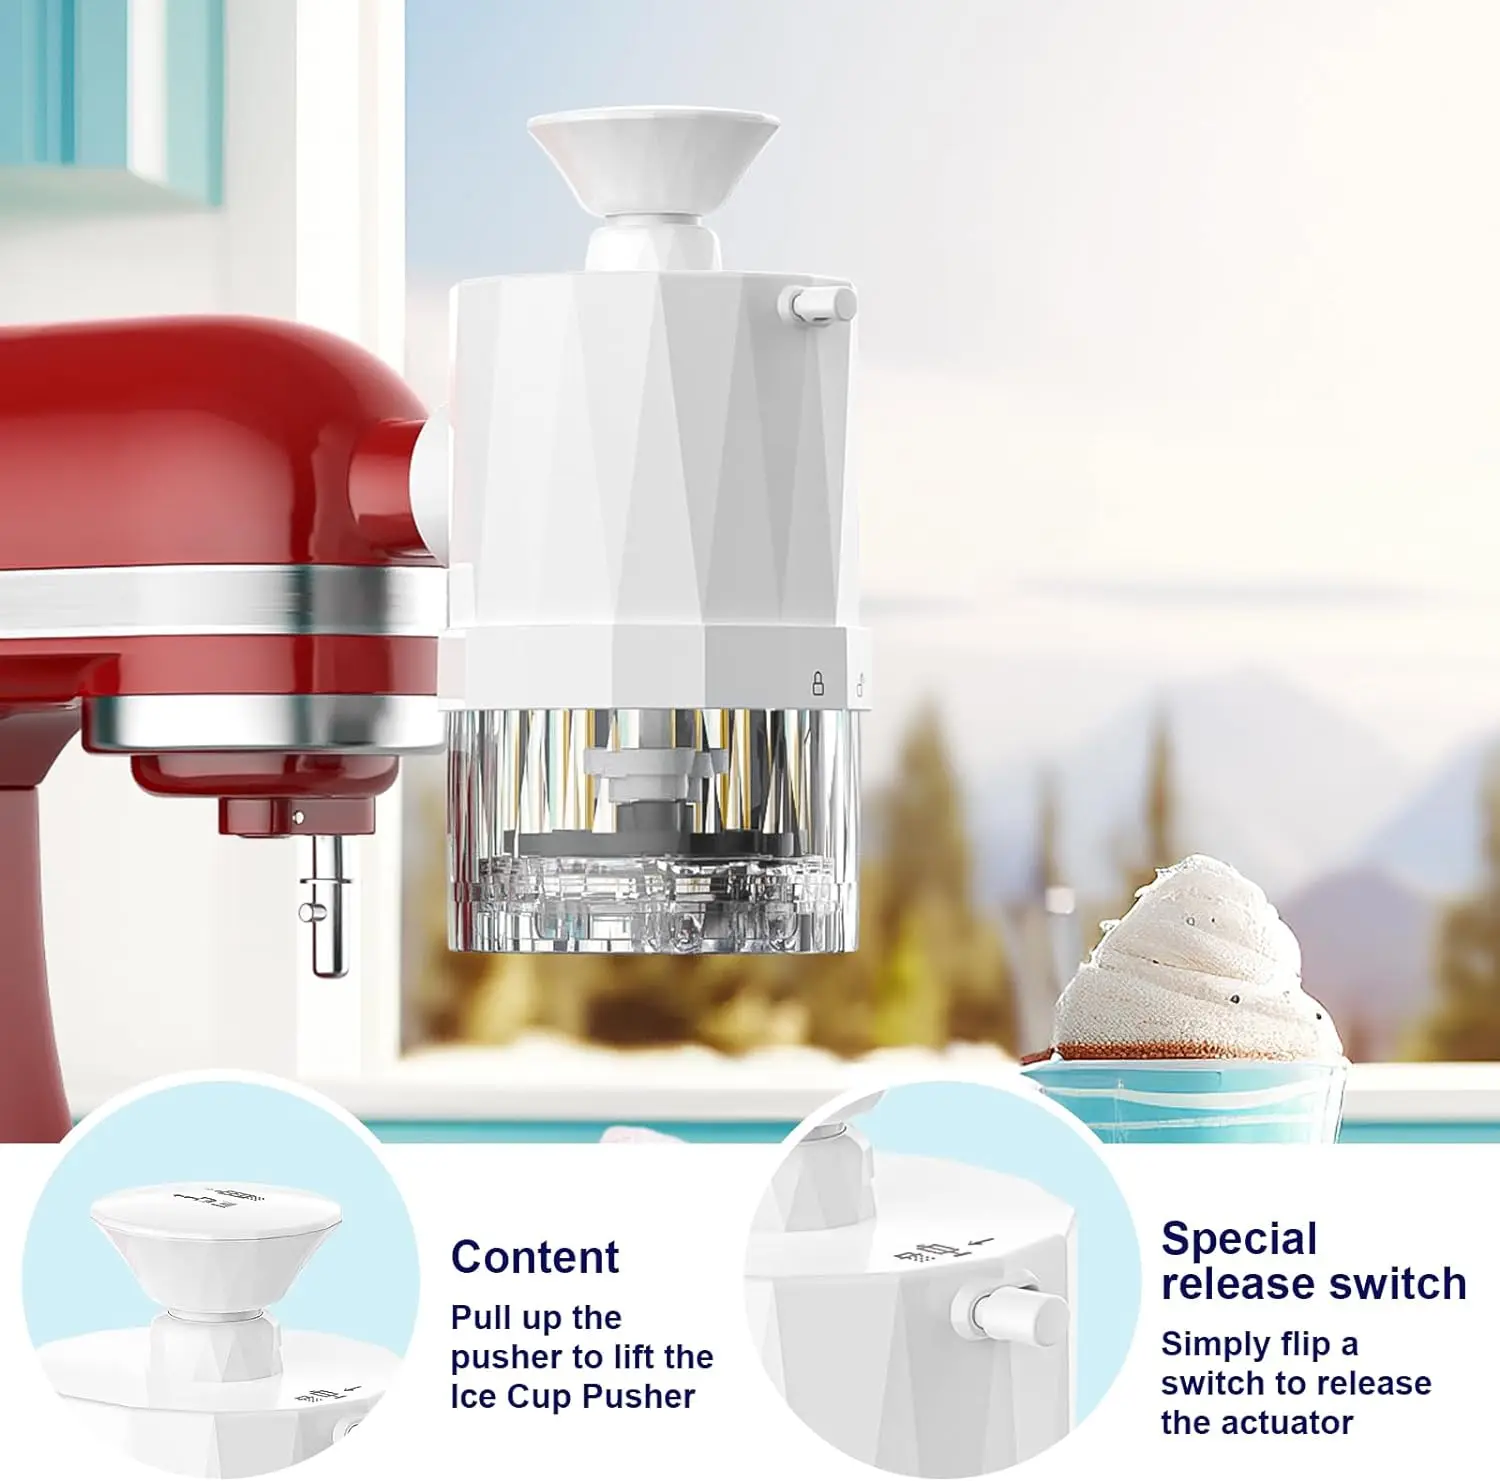 https://ae01.alicdn.com/kf/S8a0fd2ffc1f74c3fba3922d808475a7fT/Snow-Cone-Machine-with-8-Ice-Molds-Shaved-Ice-Attachment-for-KitchenAid-Stand-Mixer-As-Kitchen.jpg